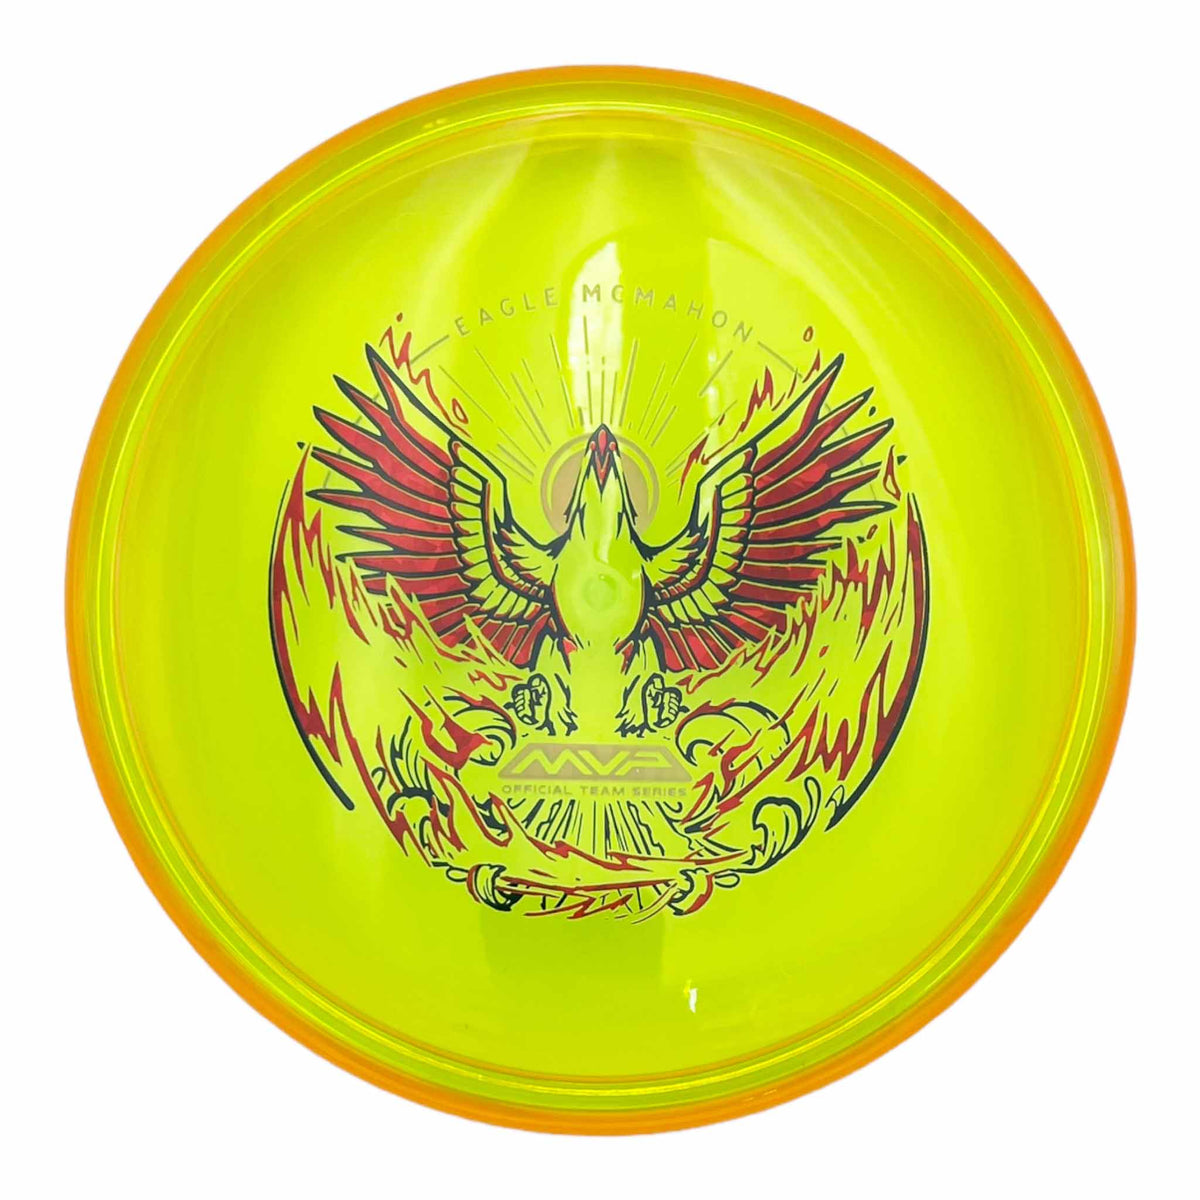 Axiom Discs Prism Proton Eagle McMahon Envy putter and approach - Yellow / Orange